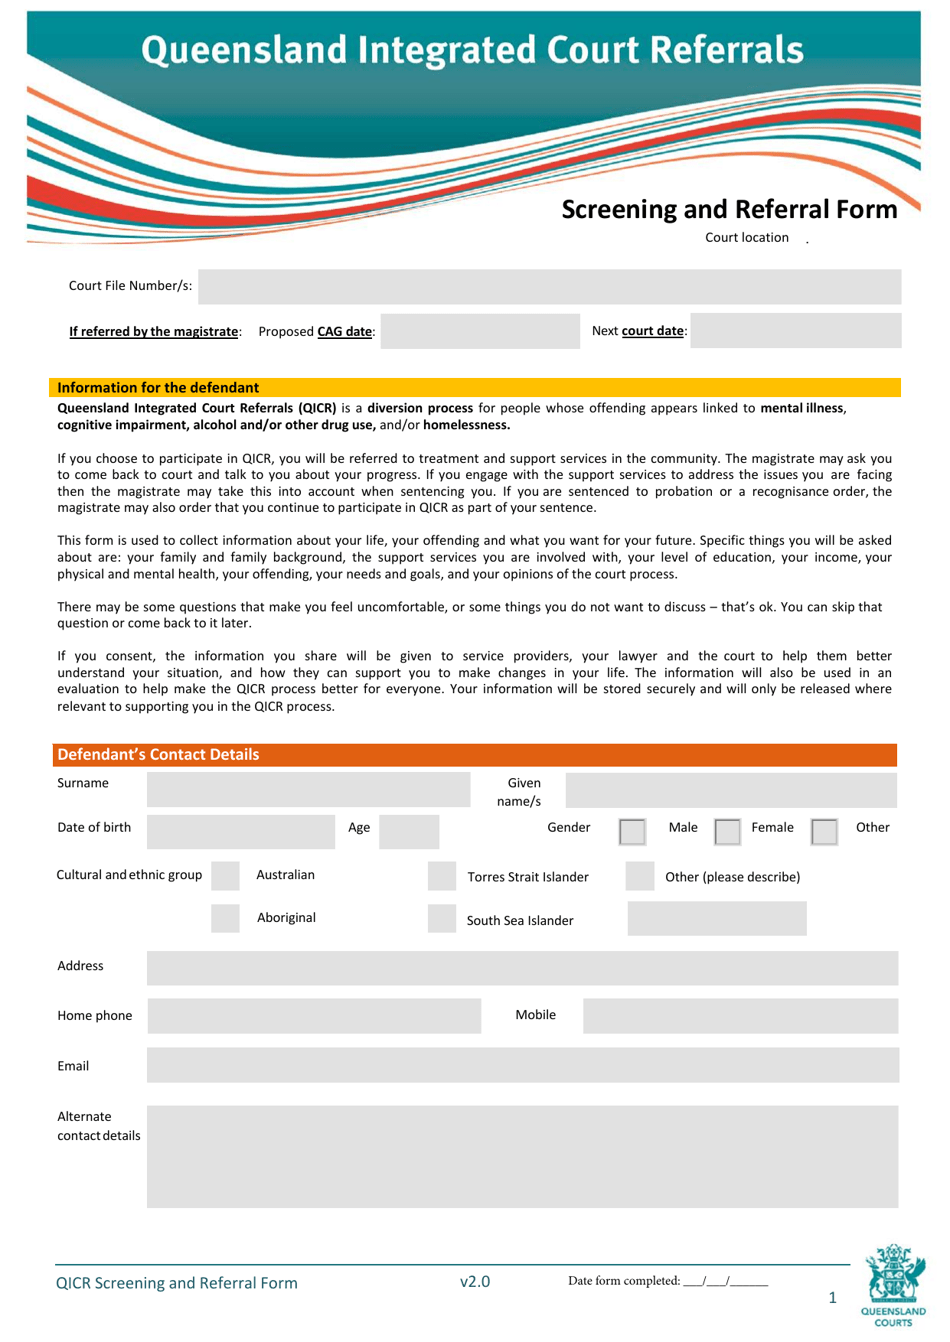 Qicr Screening and Referral Form - Queensland, Australia, Page 1